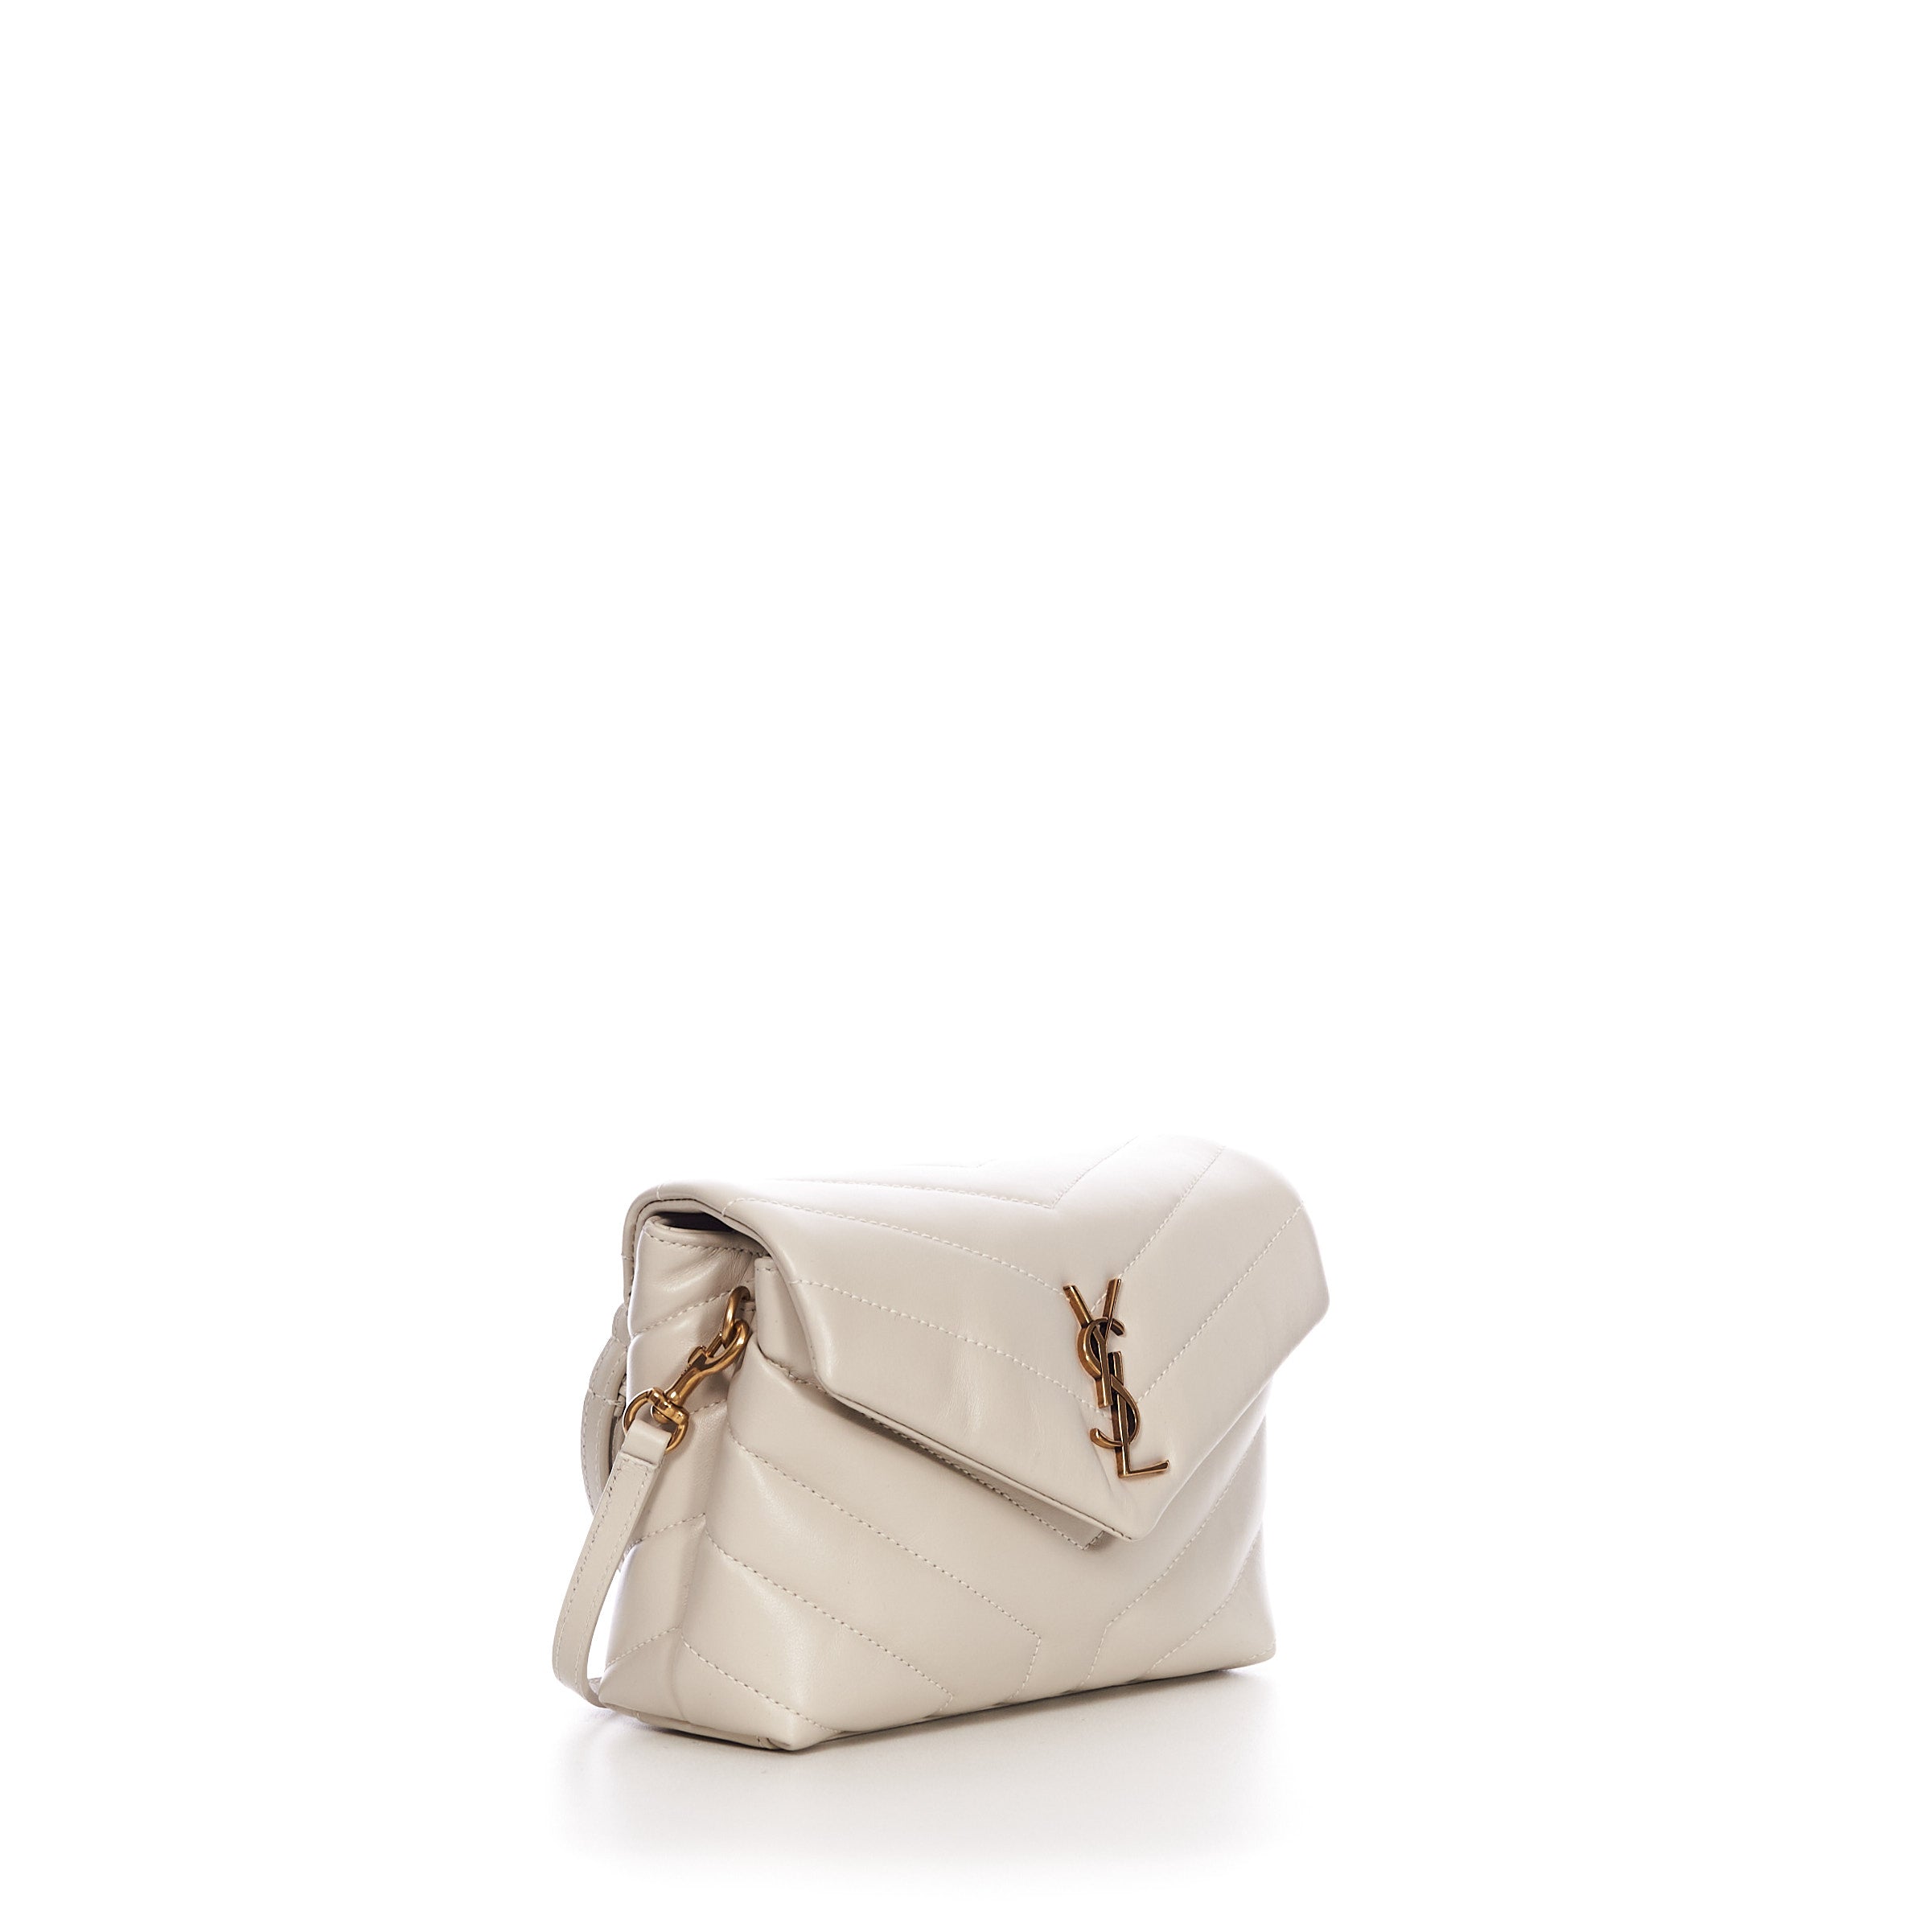 Loulou leather crossbody bag Saint Laurent White in Leather - 37318357